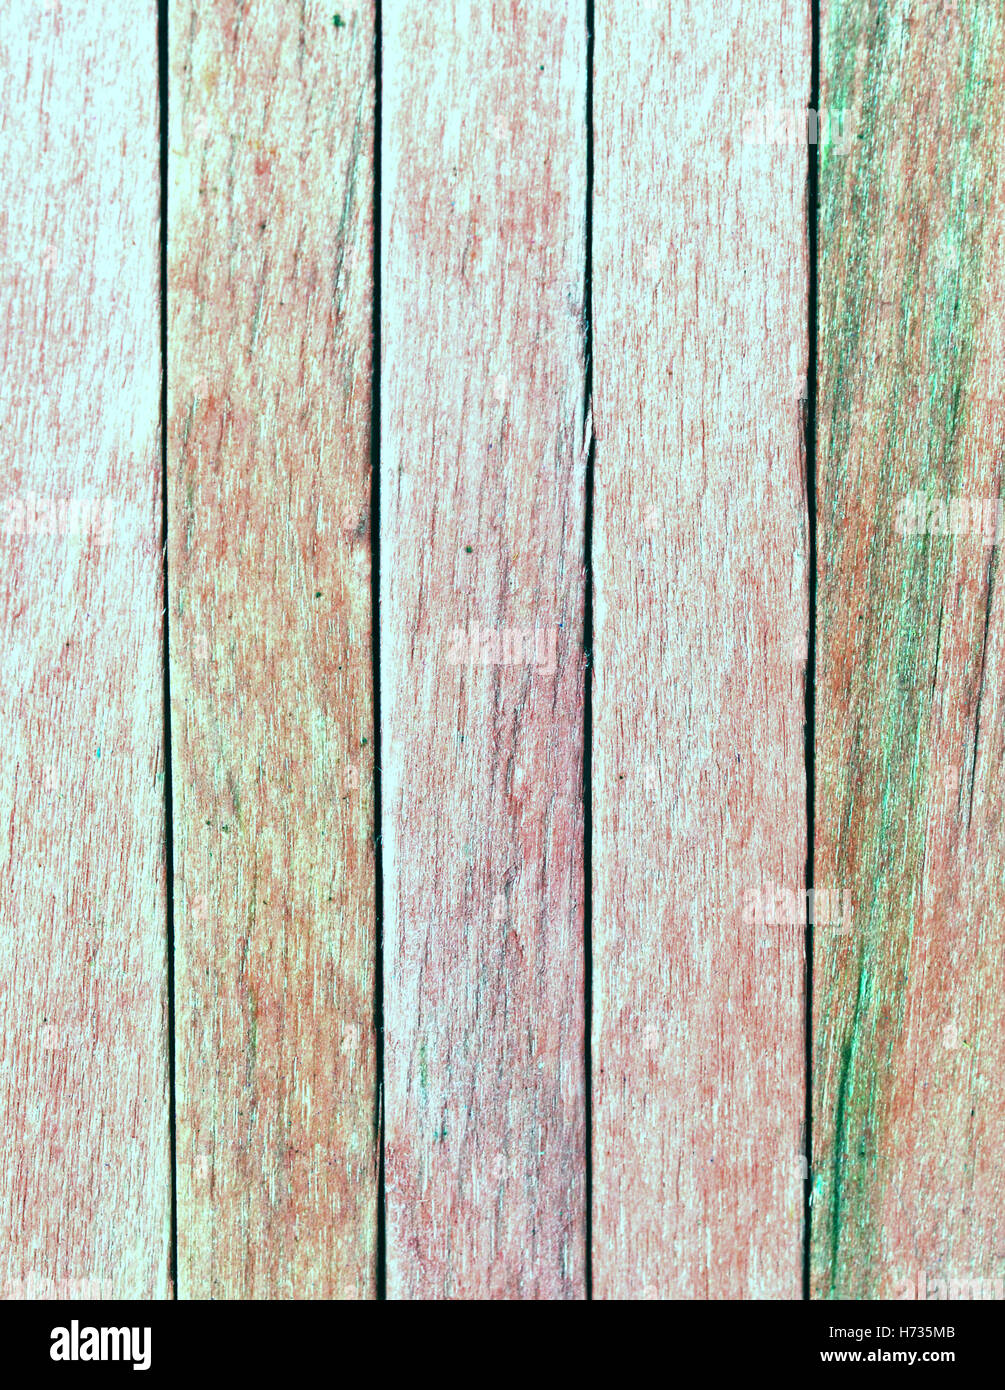 grunge wall texture, wooden fence Stock Photo